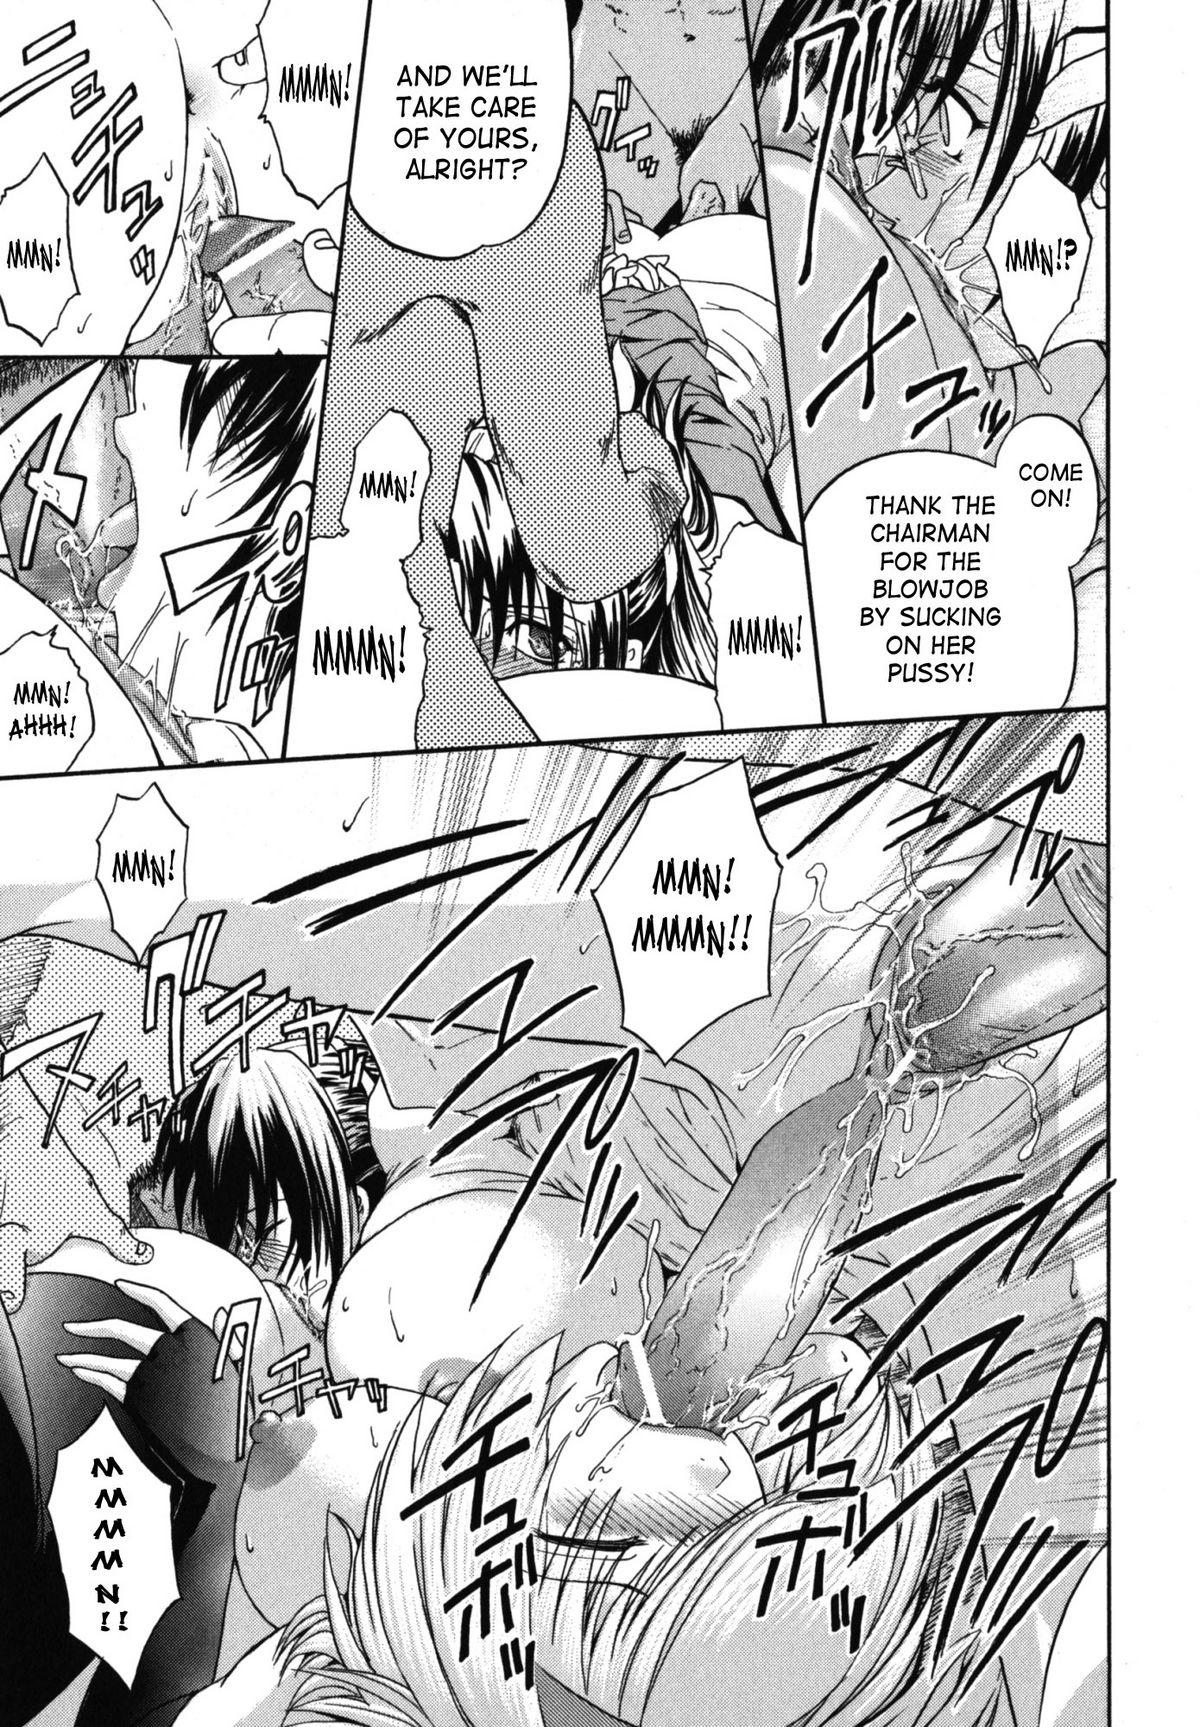 Kabe no Naka no Tenshi Jou | The Angel Within The Barrier Vol. 1 48